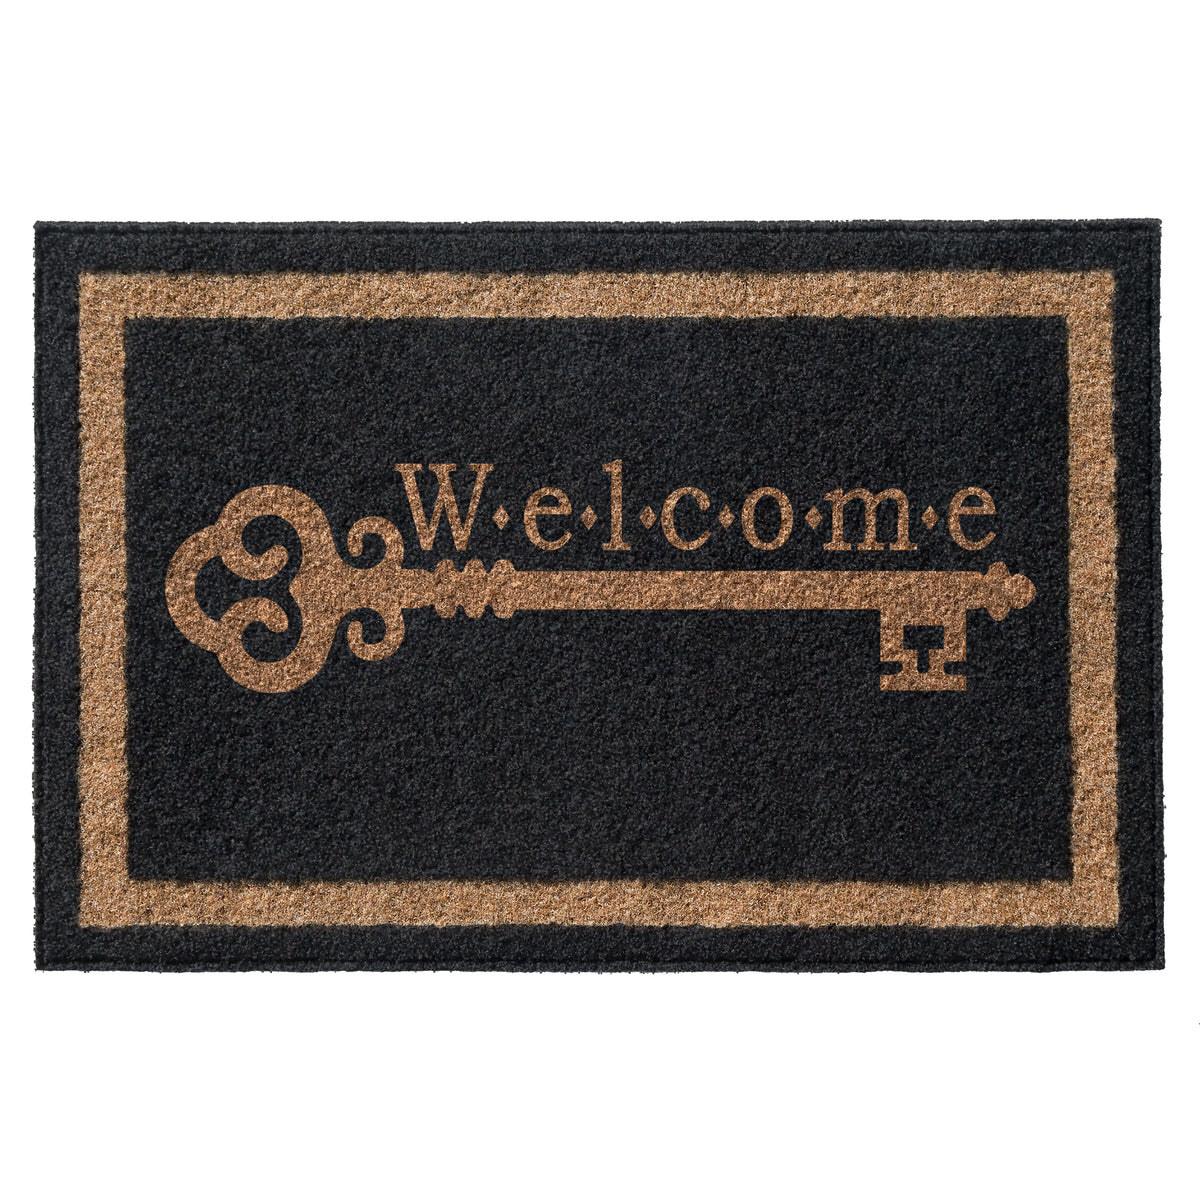 Infinity Custom Mats™ All-Weather Door Mat - STYLE: VINTAGE KEY WELCOME COLOR:BLACK - rugsthatfit.com